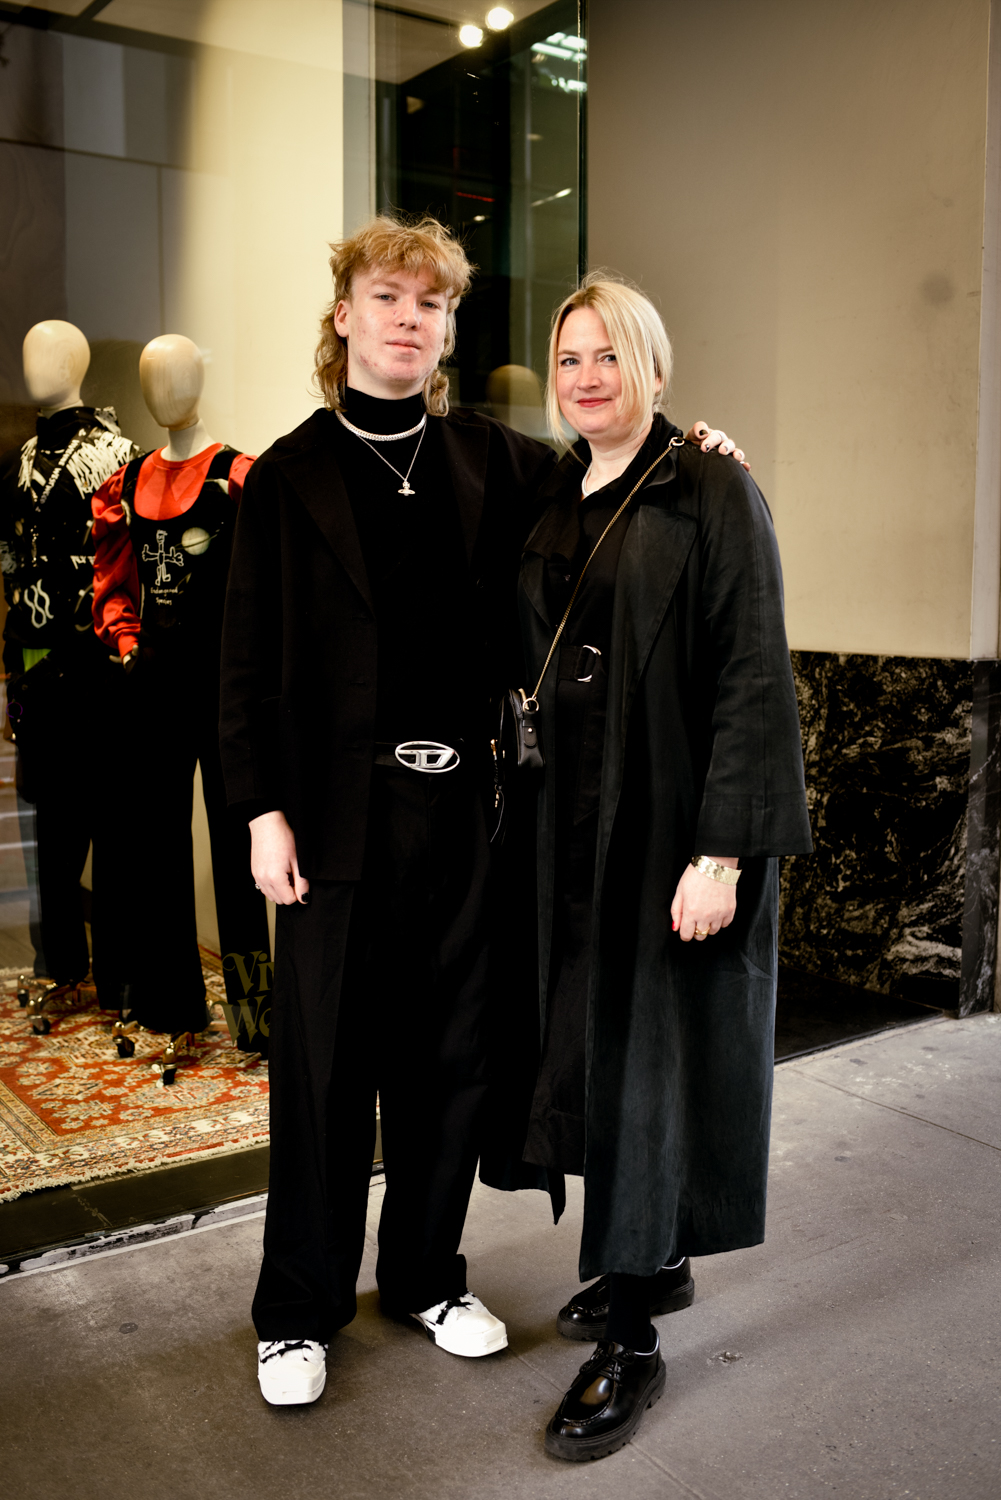 Mother and son Isabel and Titus Duellmann stand together in front of the Vivienne Westwood New York City store. They are wearing all black clothing.